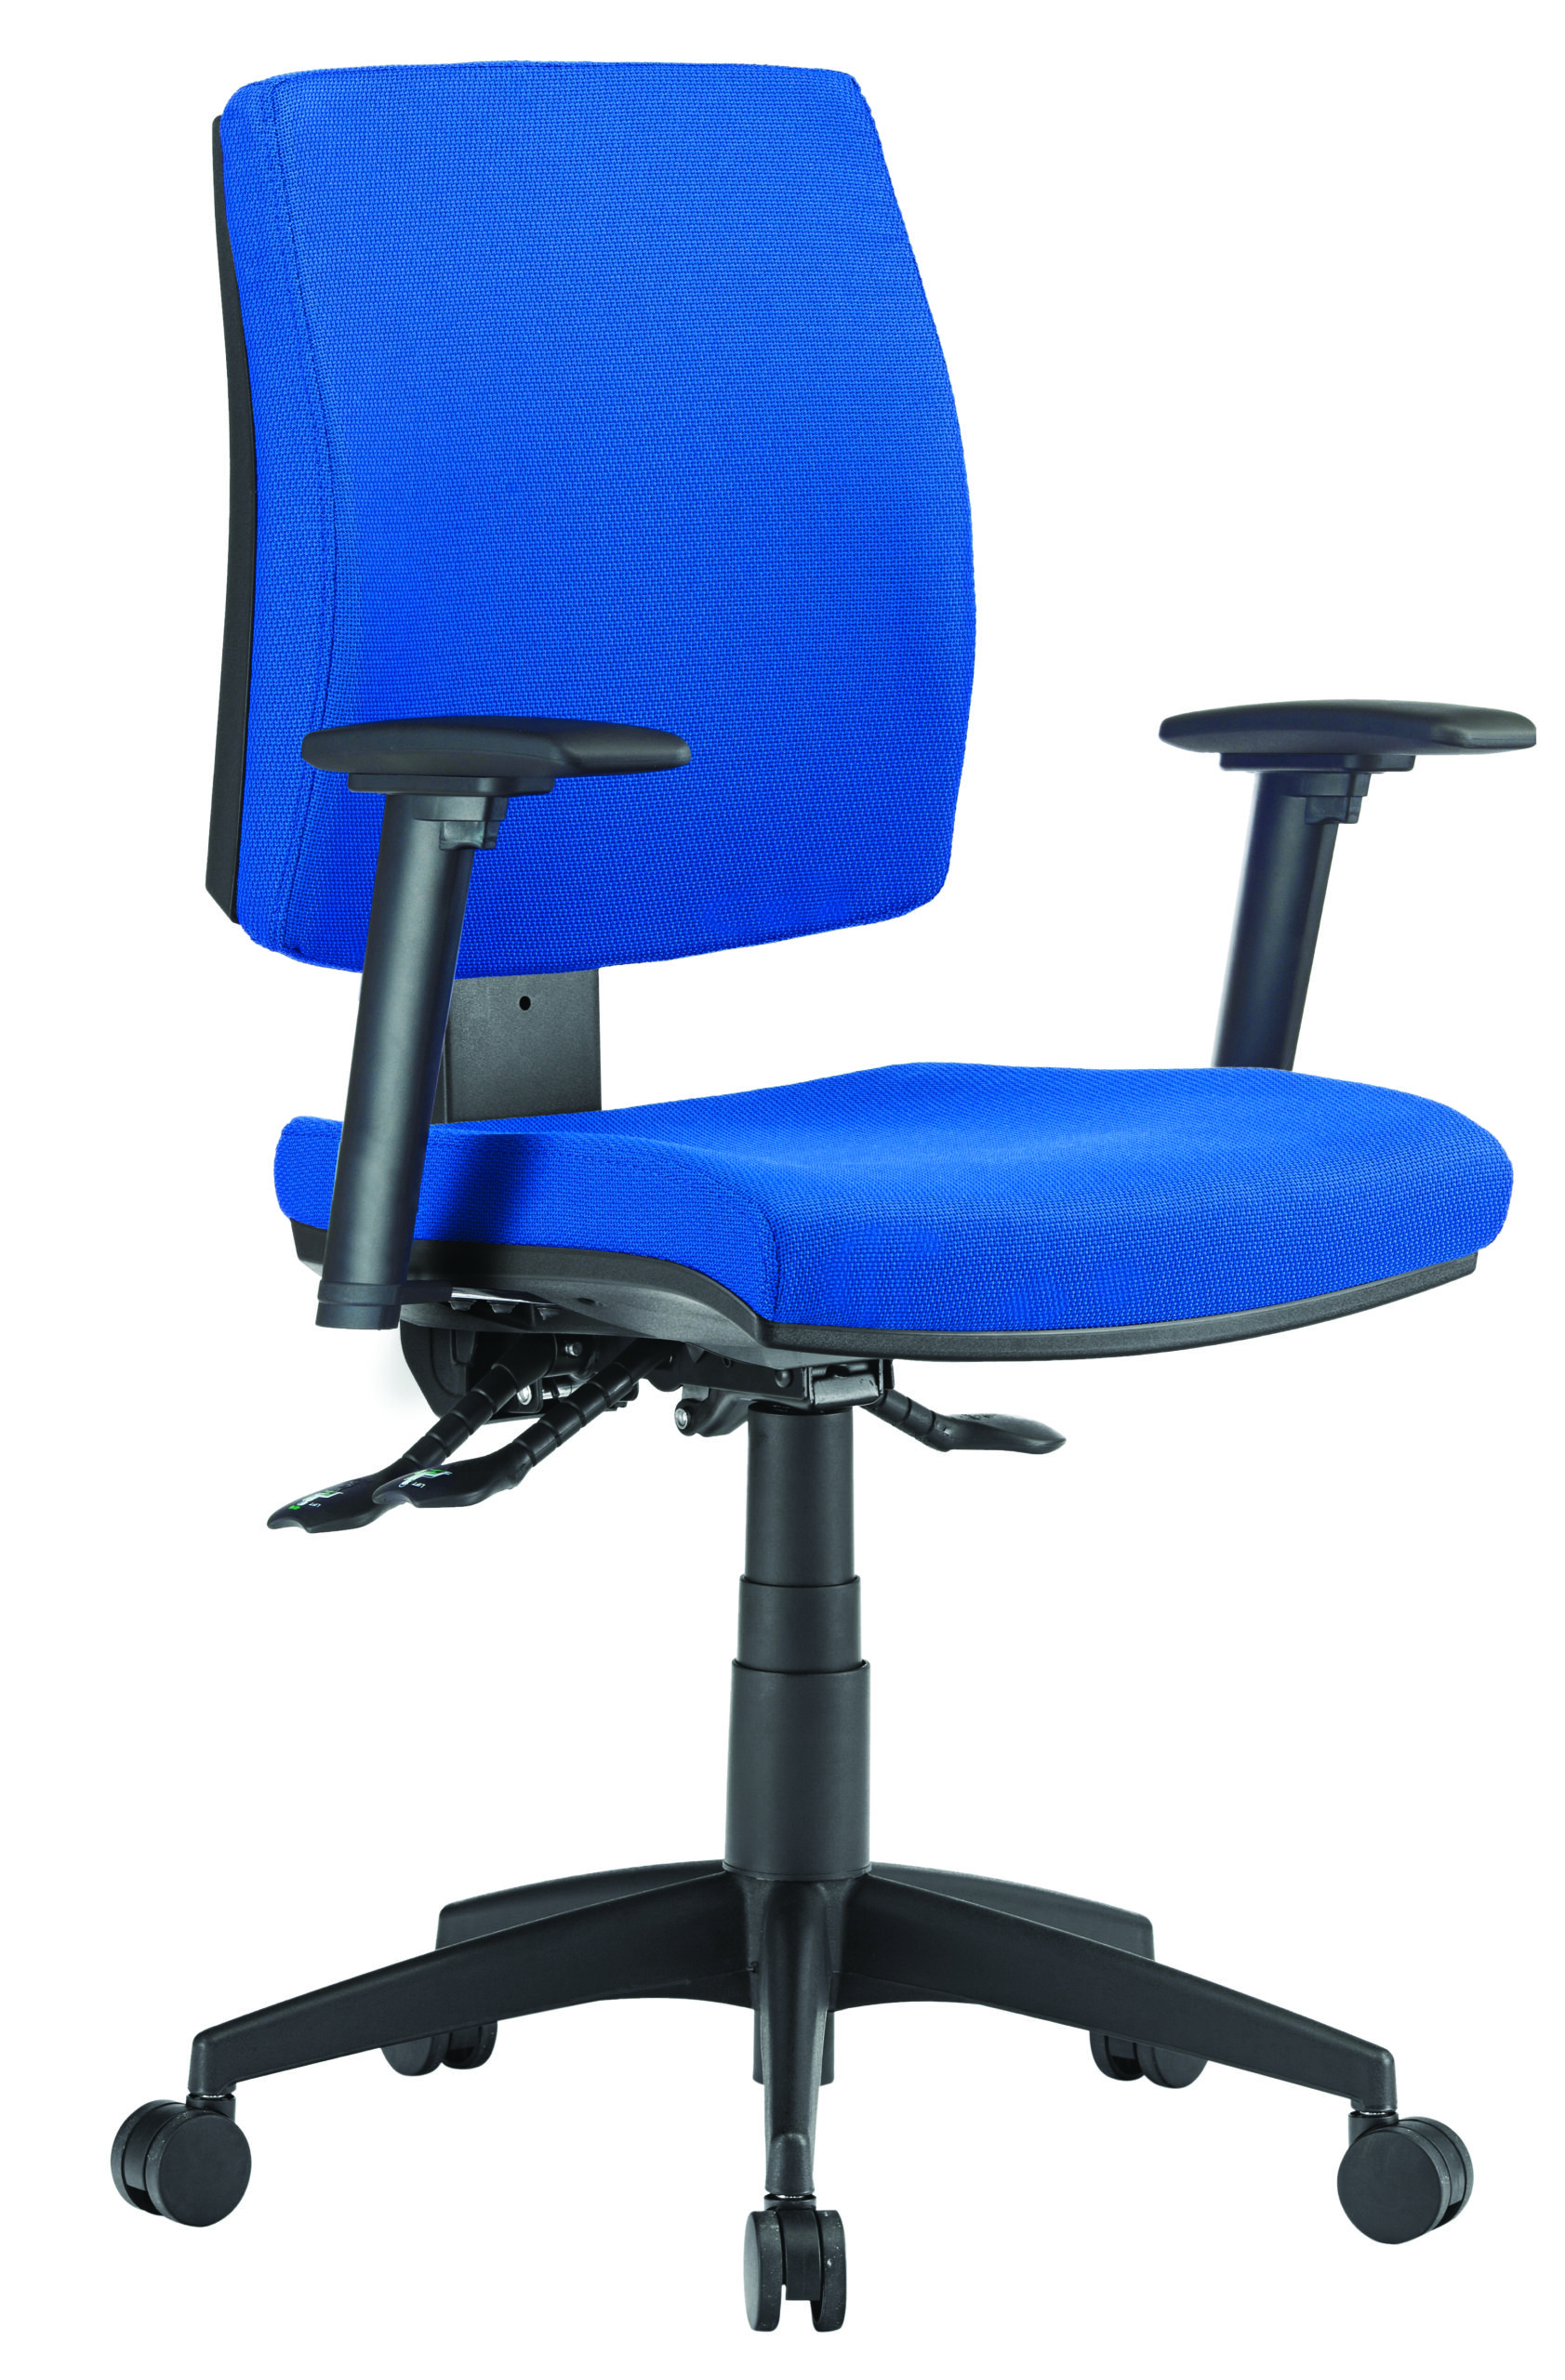 Virgo 3 Lever Low Back Square Seat Task Chair With Arms